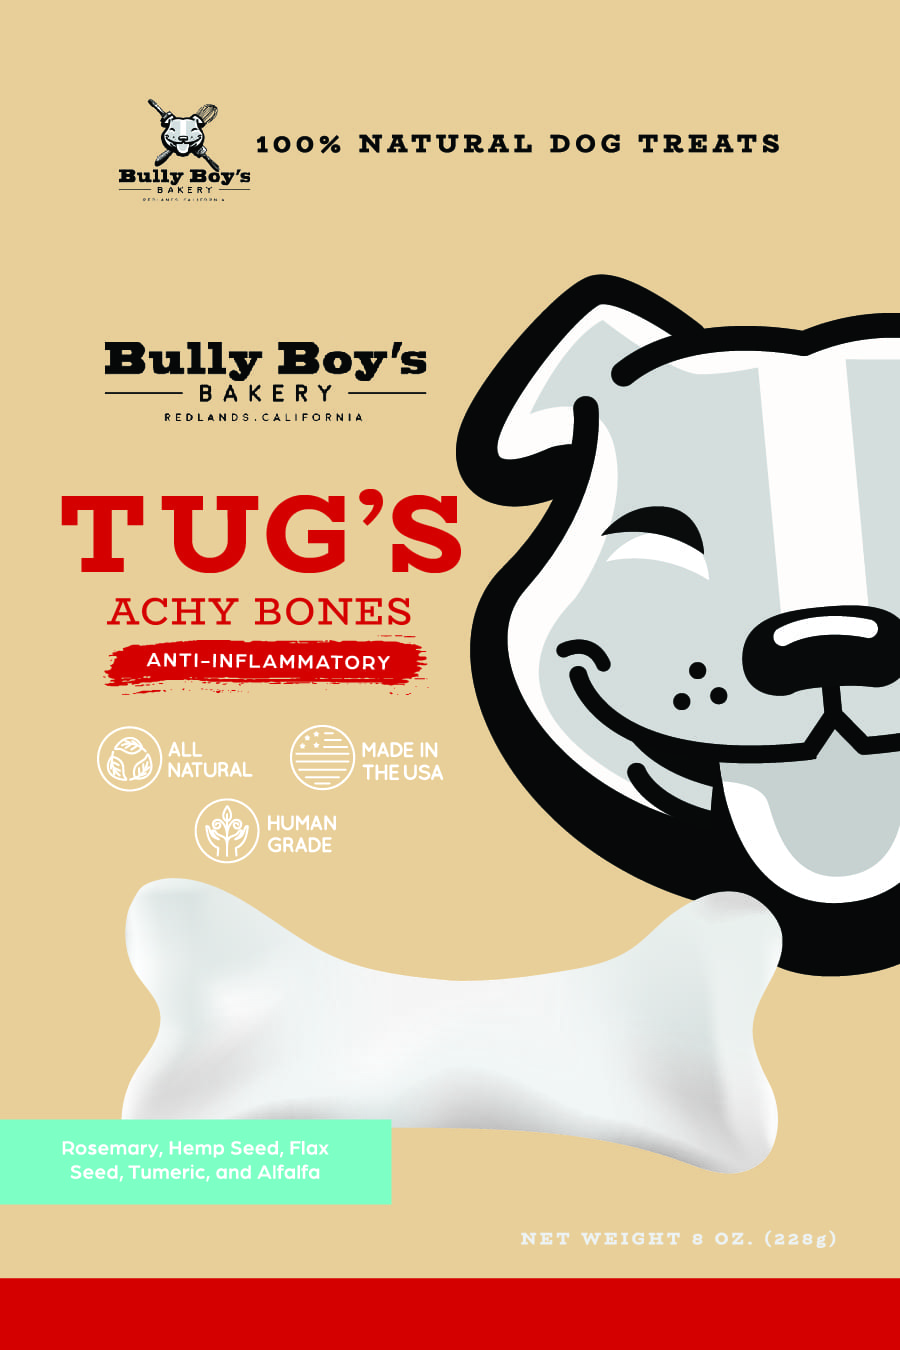 Bully Boys Package design FRONT APPROVED_Bully Boys-Tugs achy bones FRONT